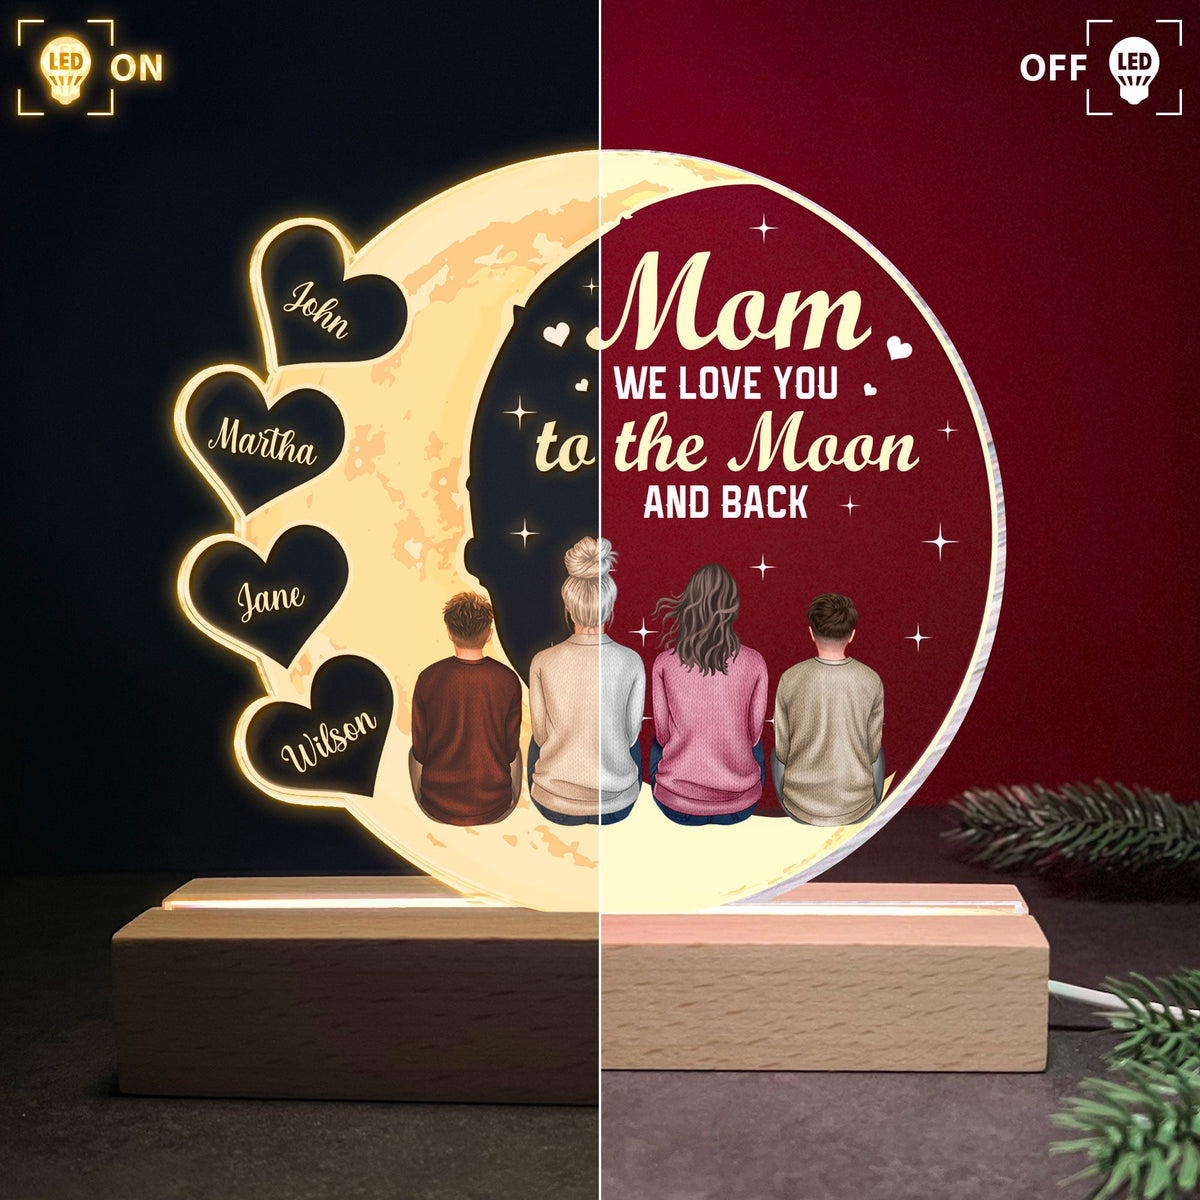 Family - Mom We Love You To The Moon And Back - Personalized LED Light